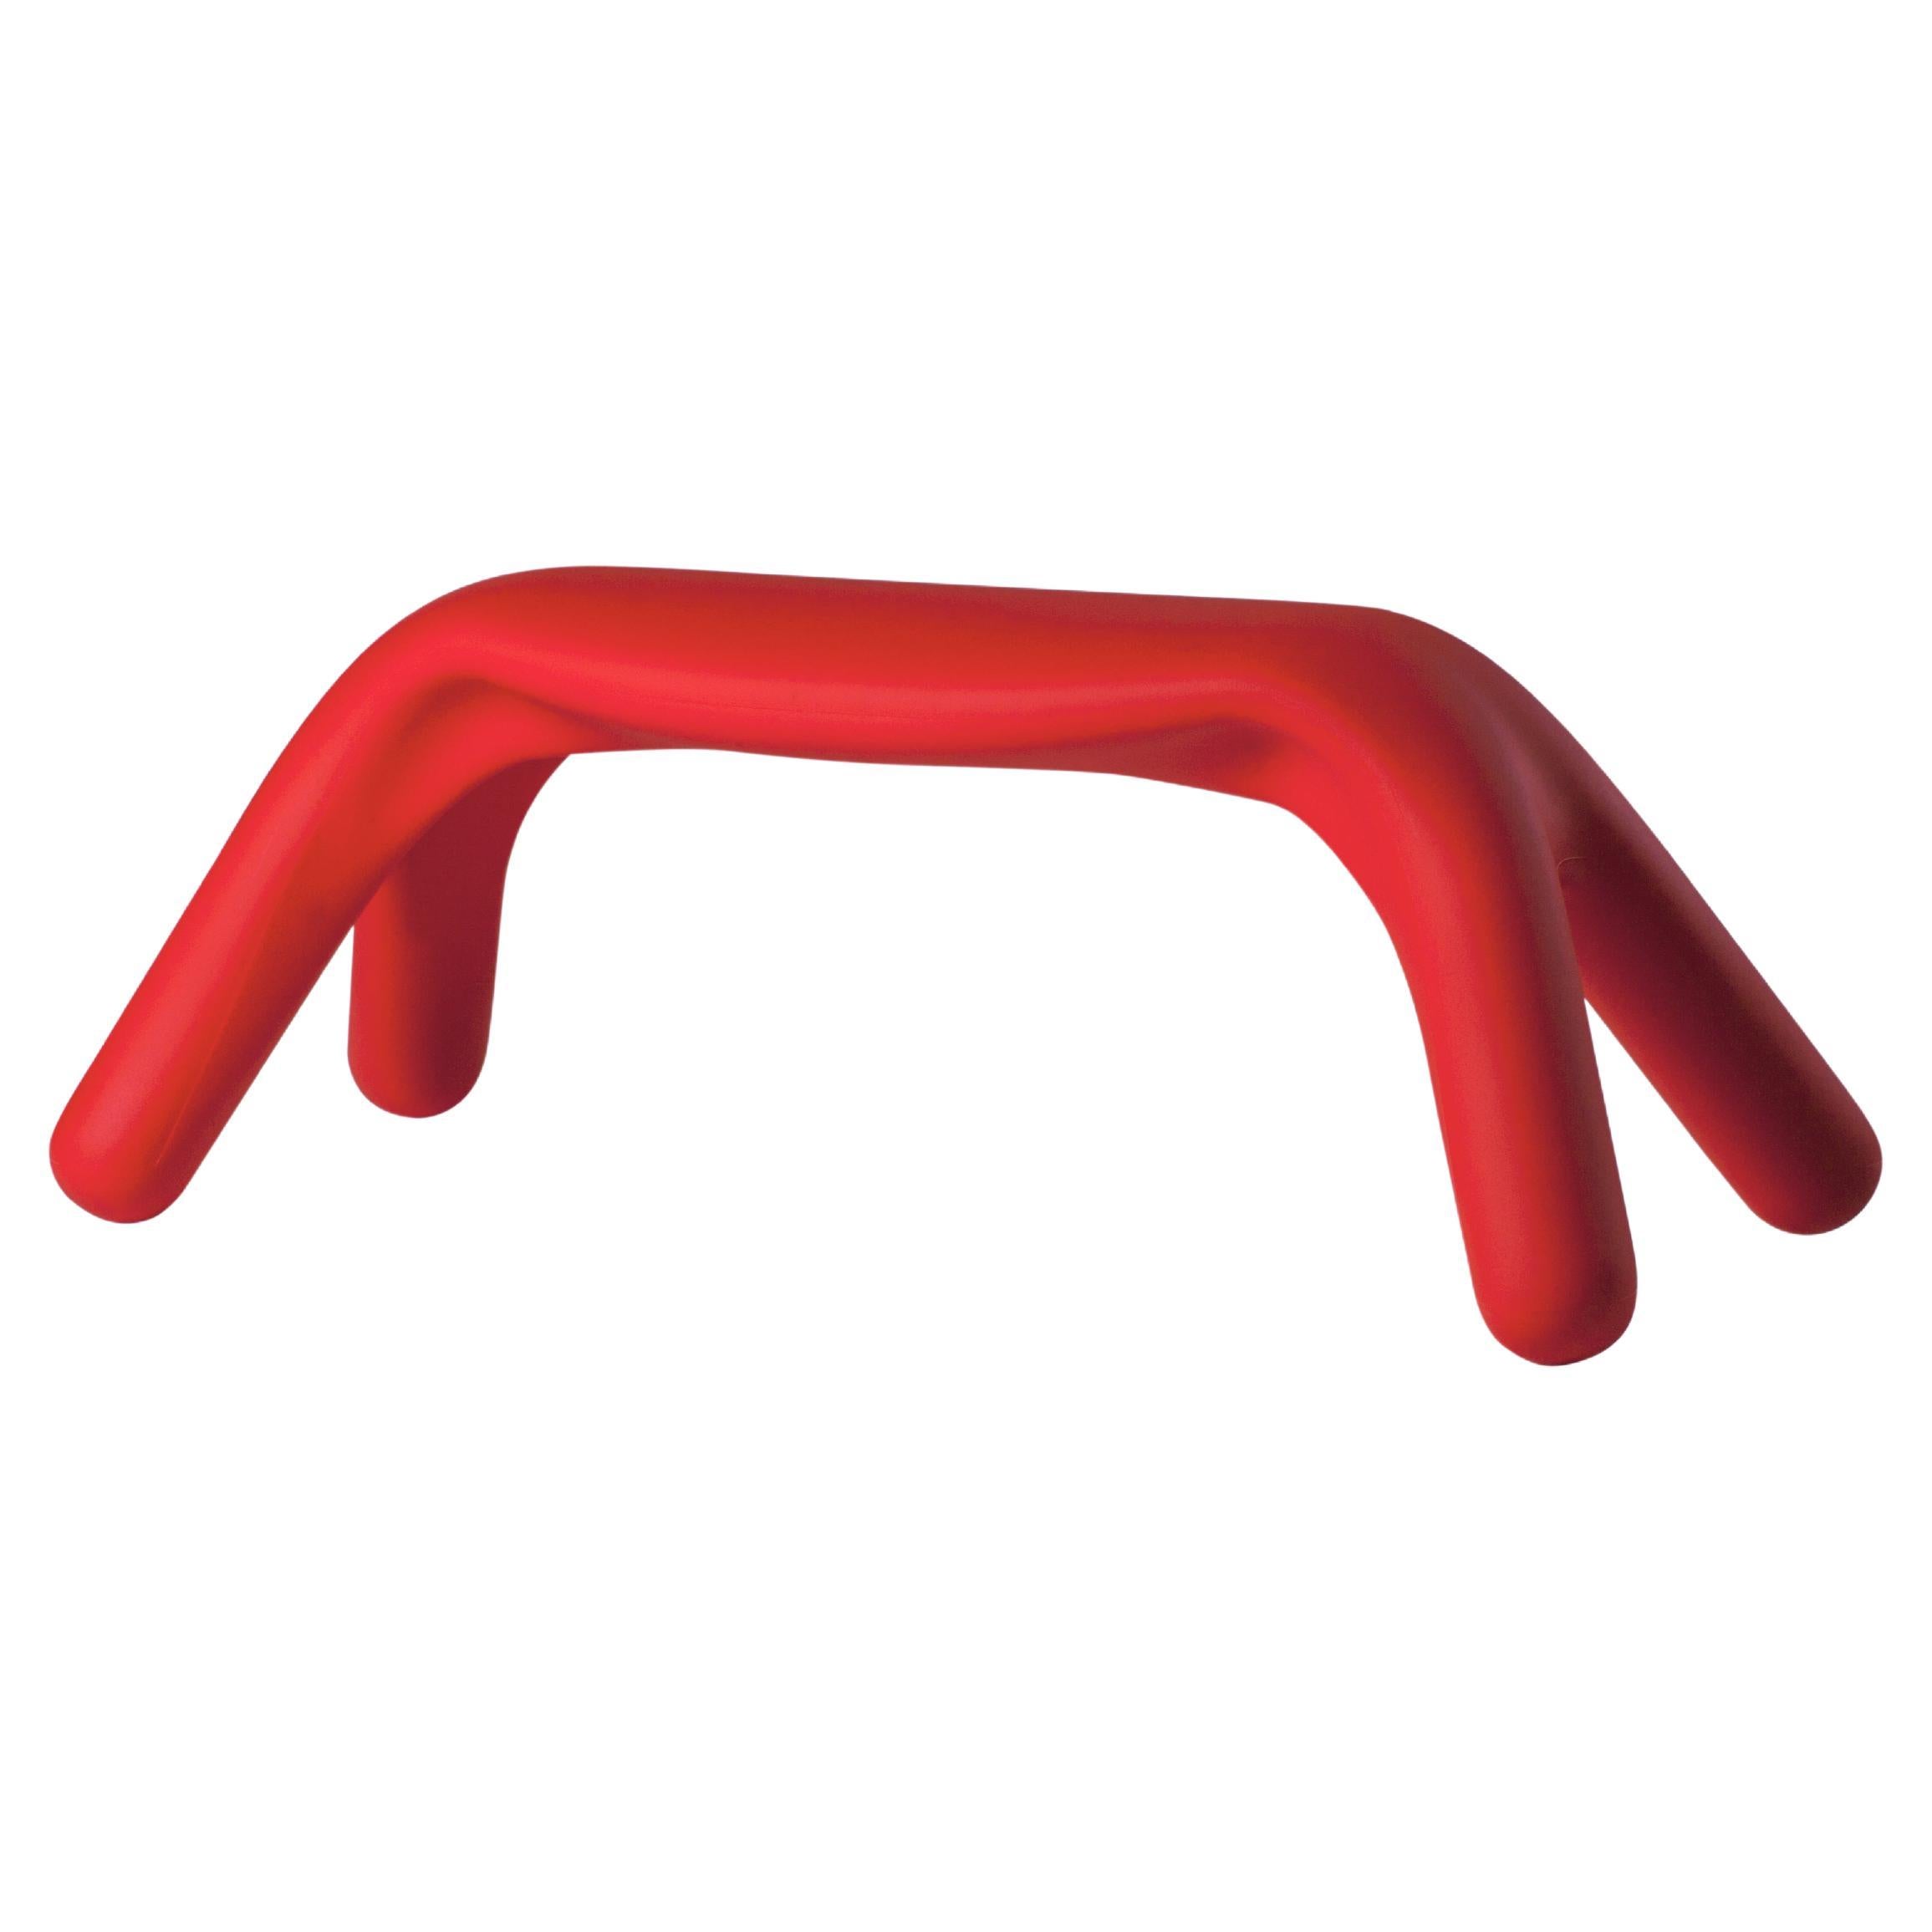 Flame Red Atlas Bench by Giorgio Biscaro For Sale